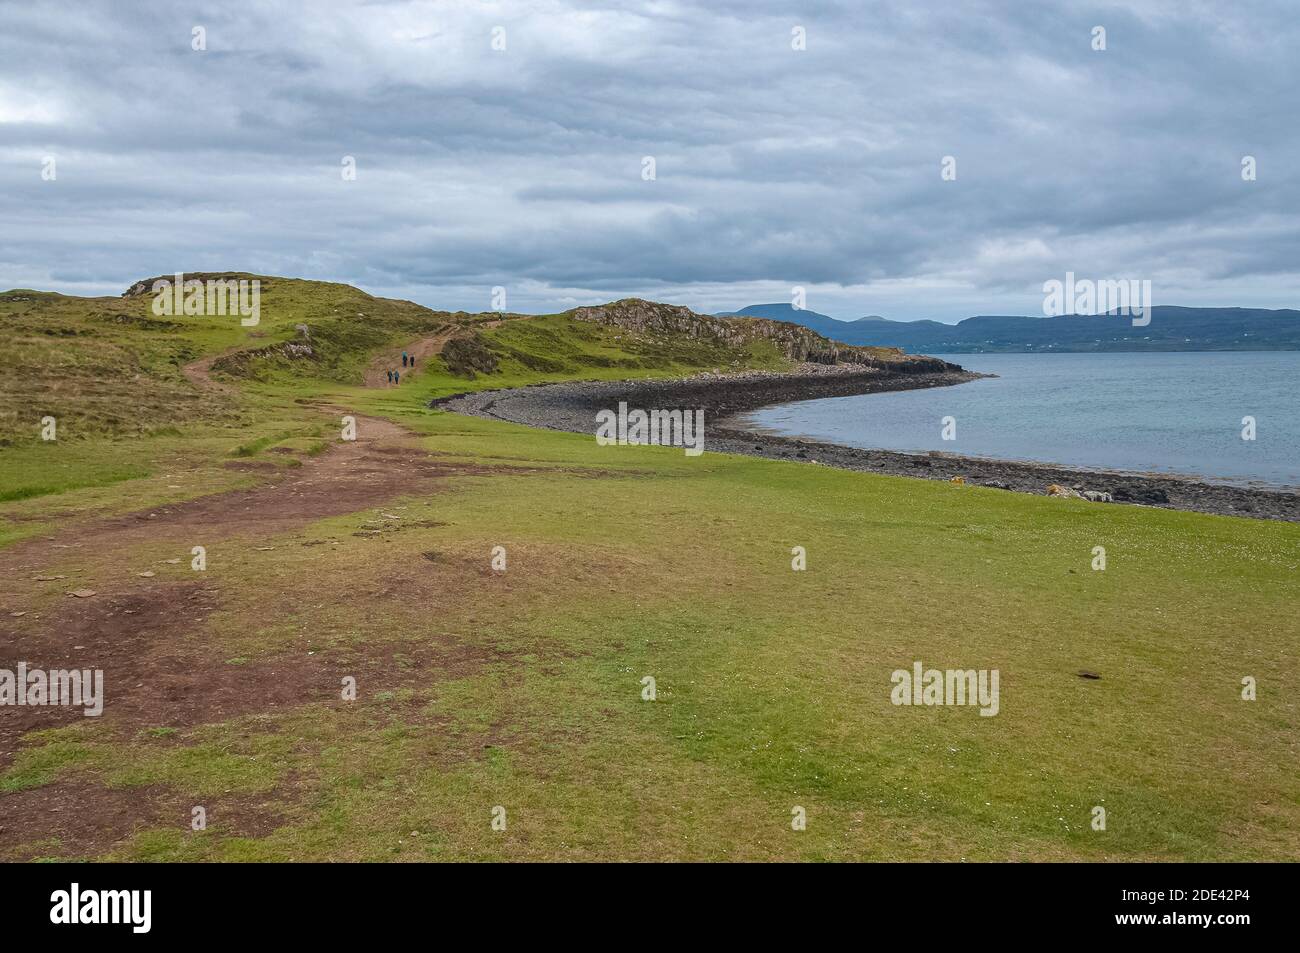 Panorama of black beach, Coral Beach, Isle of Skye, Scotland. Concept: famous natural landscape, Scottish landscape, tranquility and serenity, seascap Stock Photo